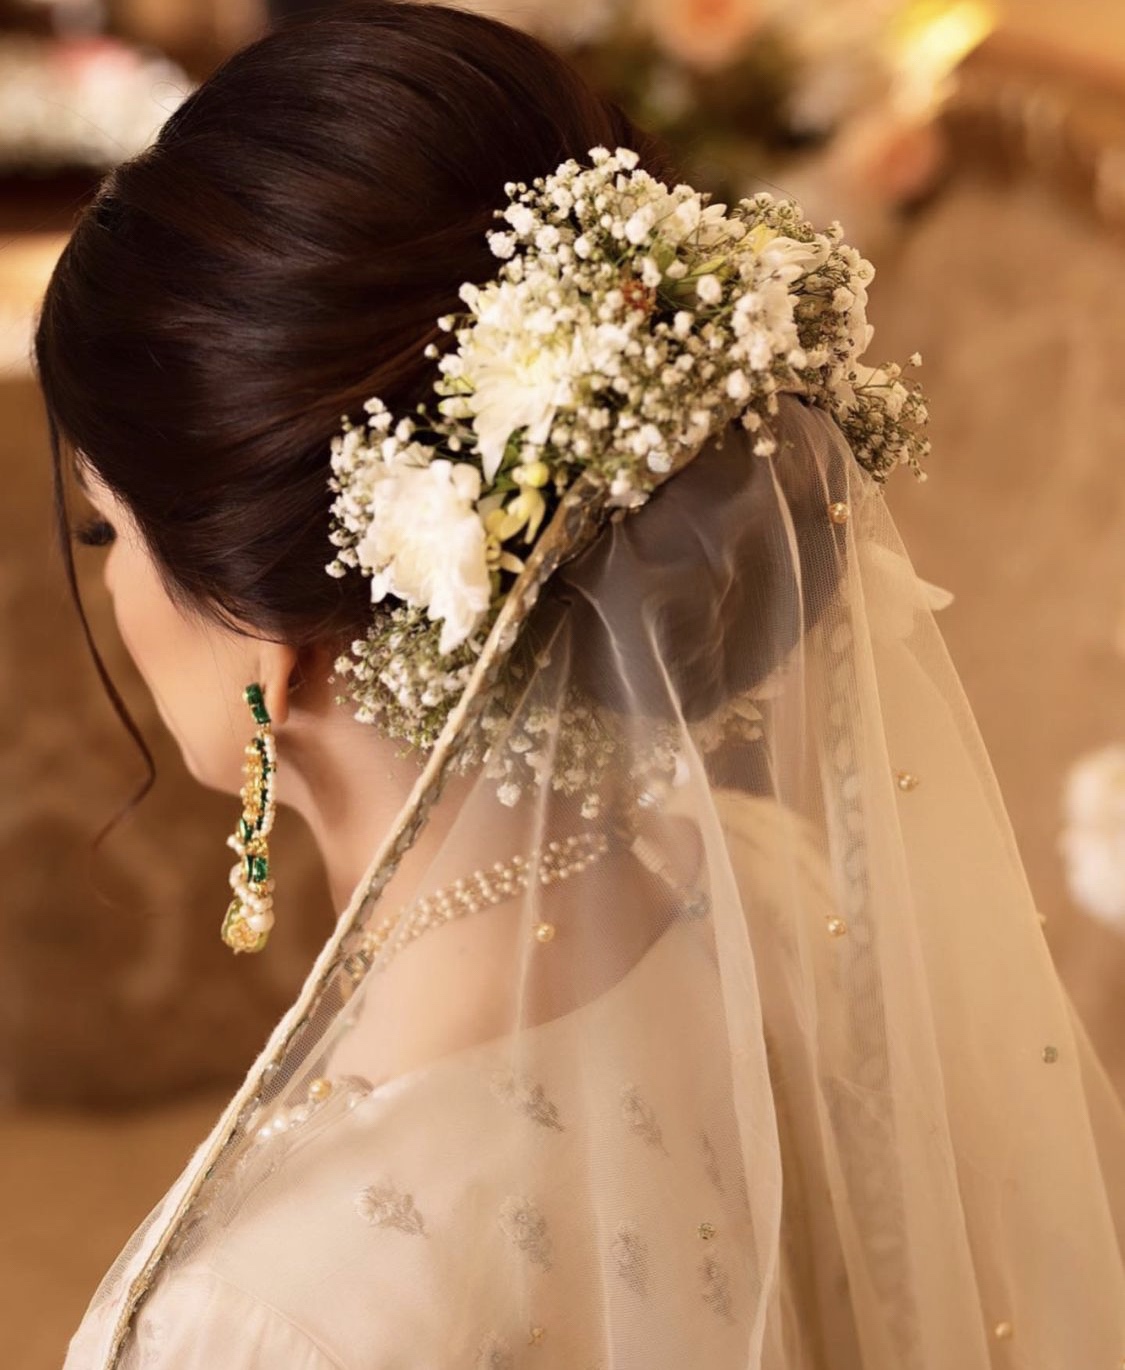 Hairstyles for all wedding functions – The Odd Onee